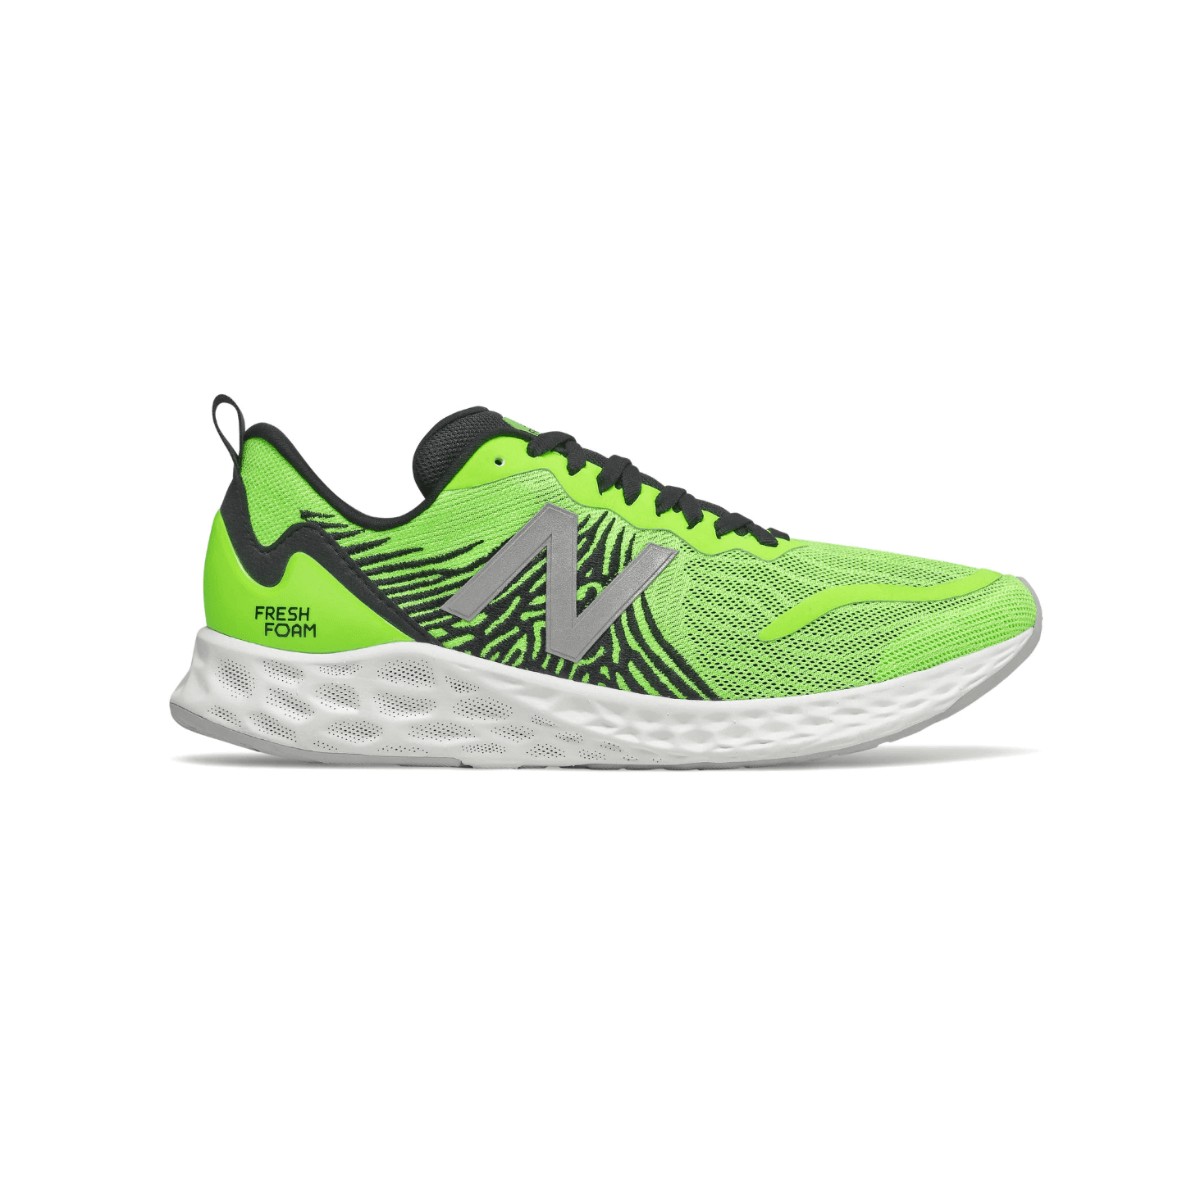 New Balance Lime Green Running Shoes 